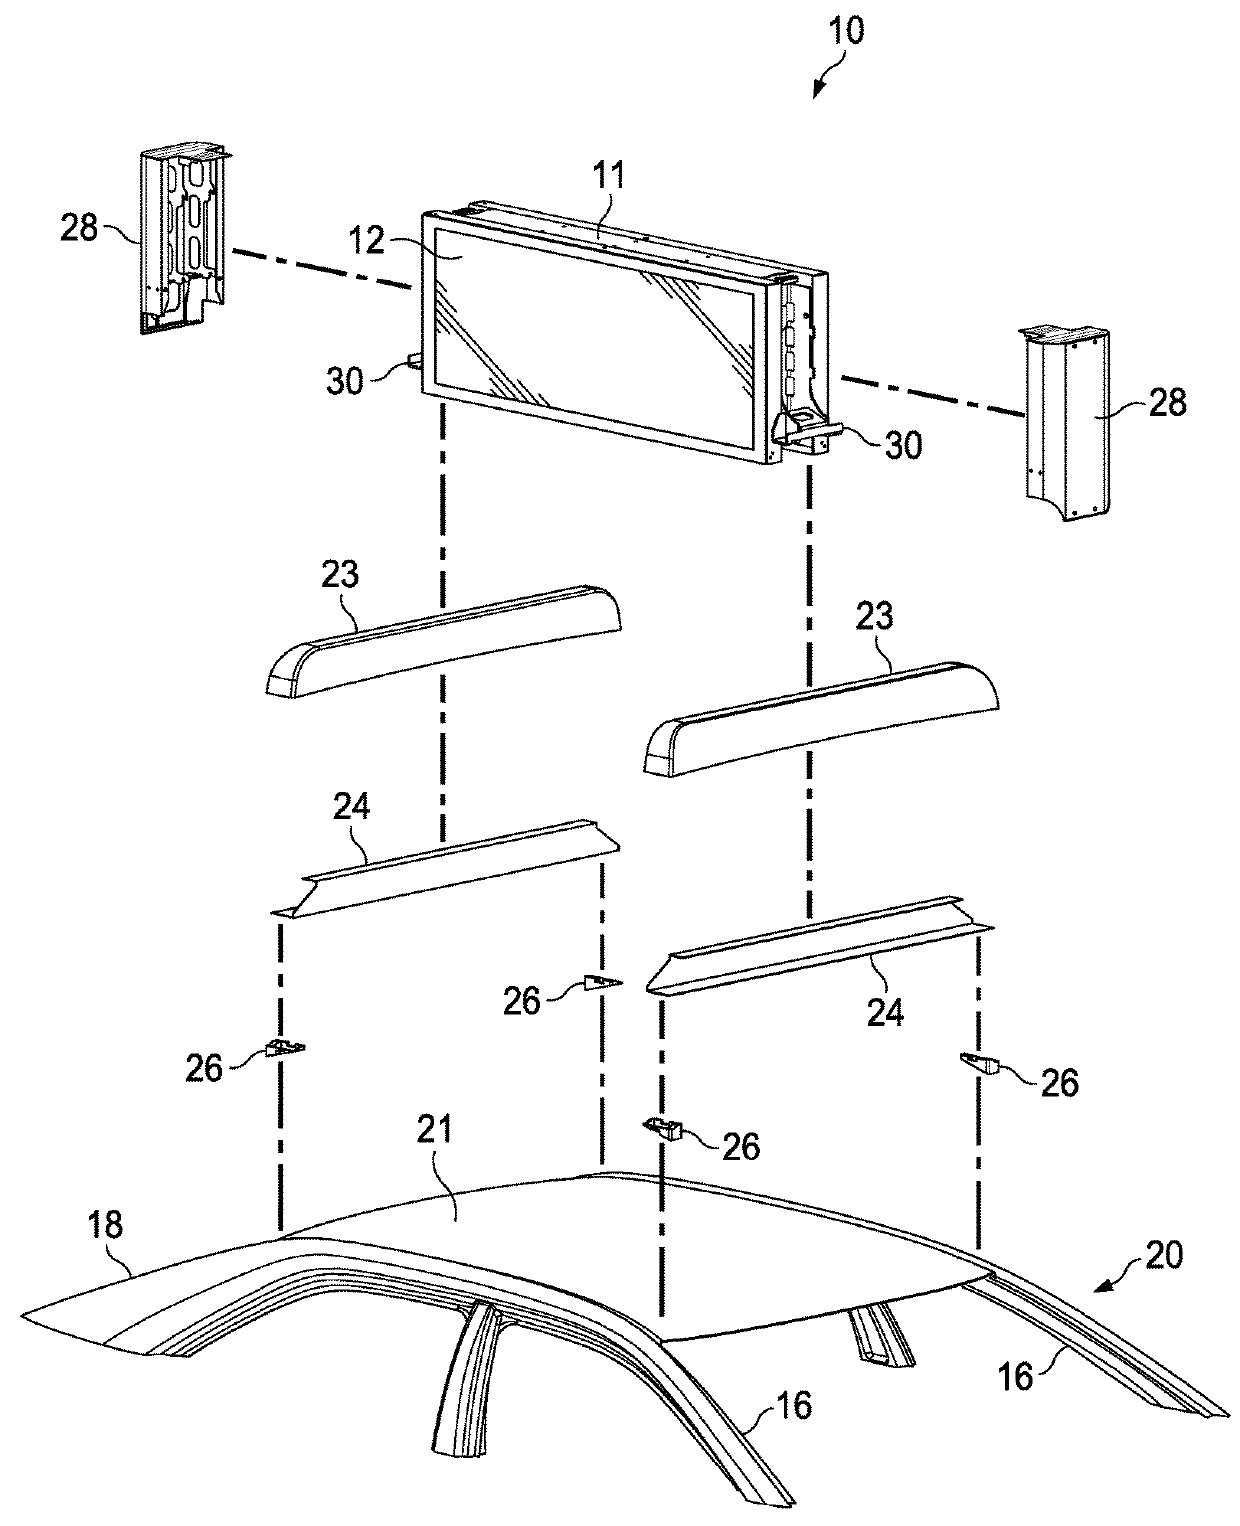 Roof mounting apparatus and system for vehicle topper